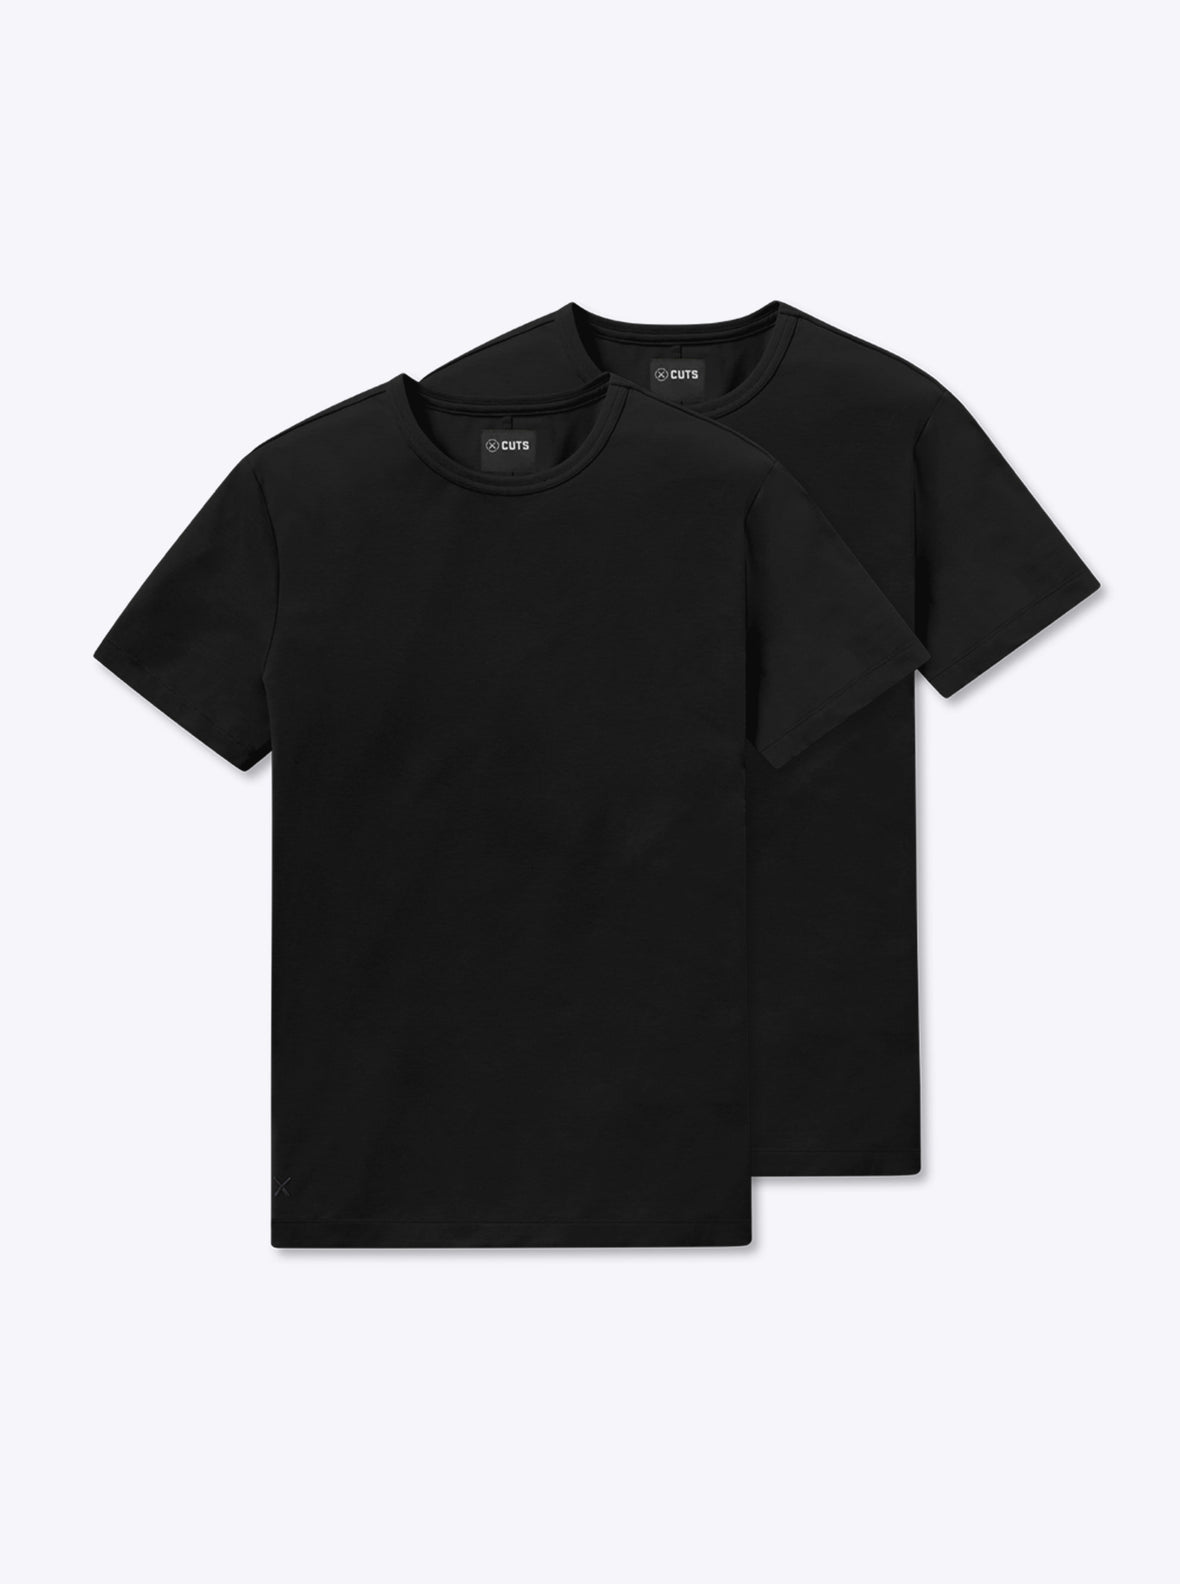 AO Forever Tee 2-Pack | Black Signature-Fit PYCA Pro®